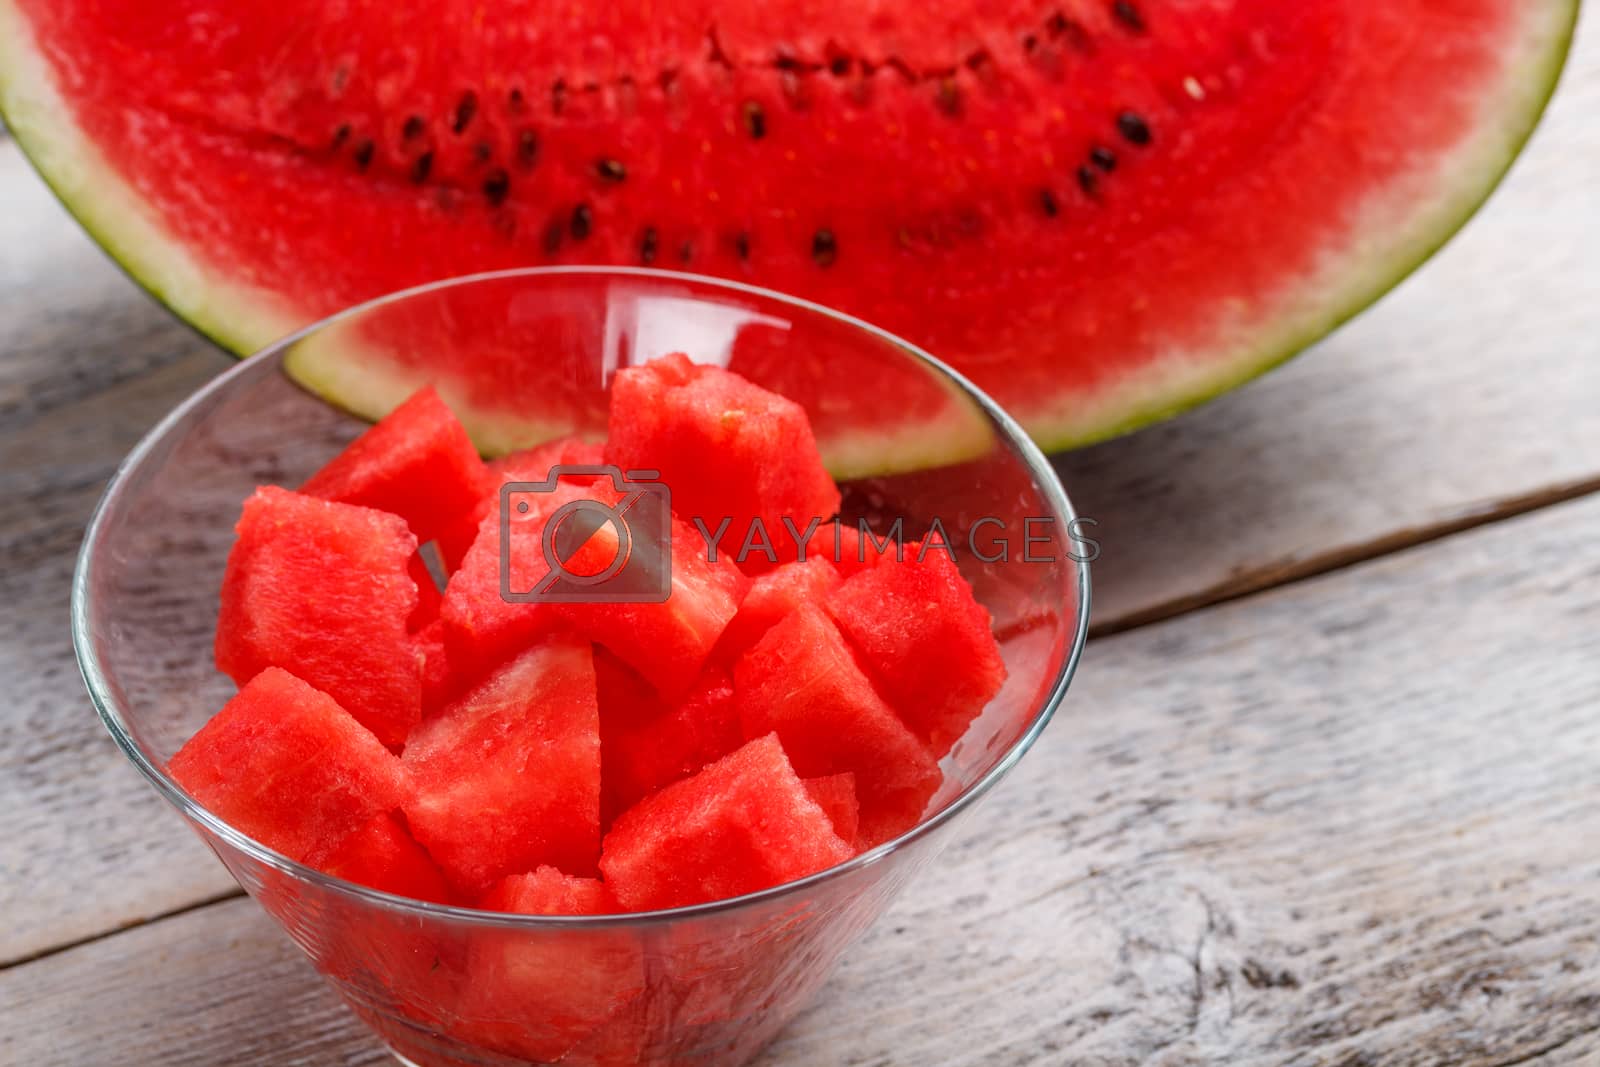 Royalty free image of Watermelon by grafvision